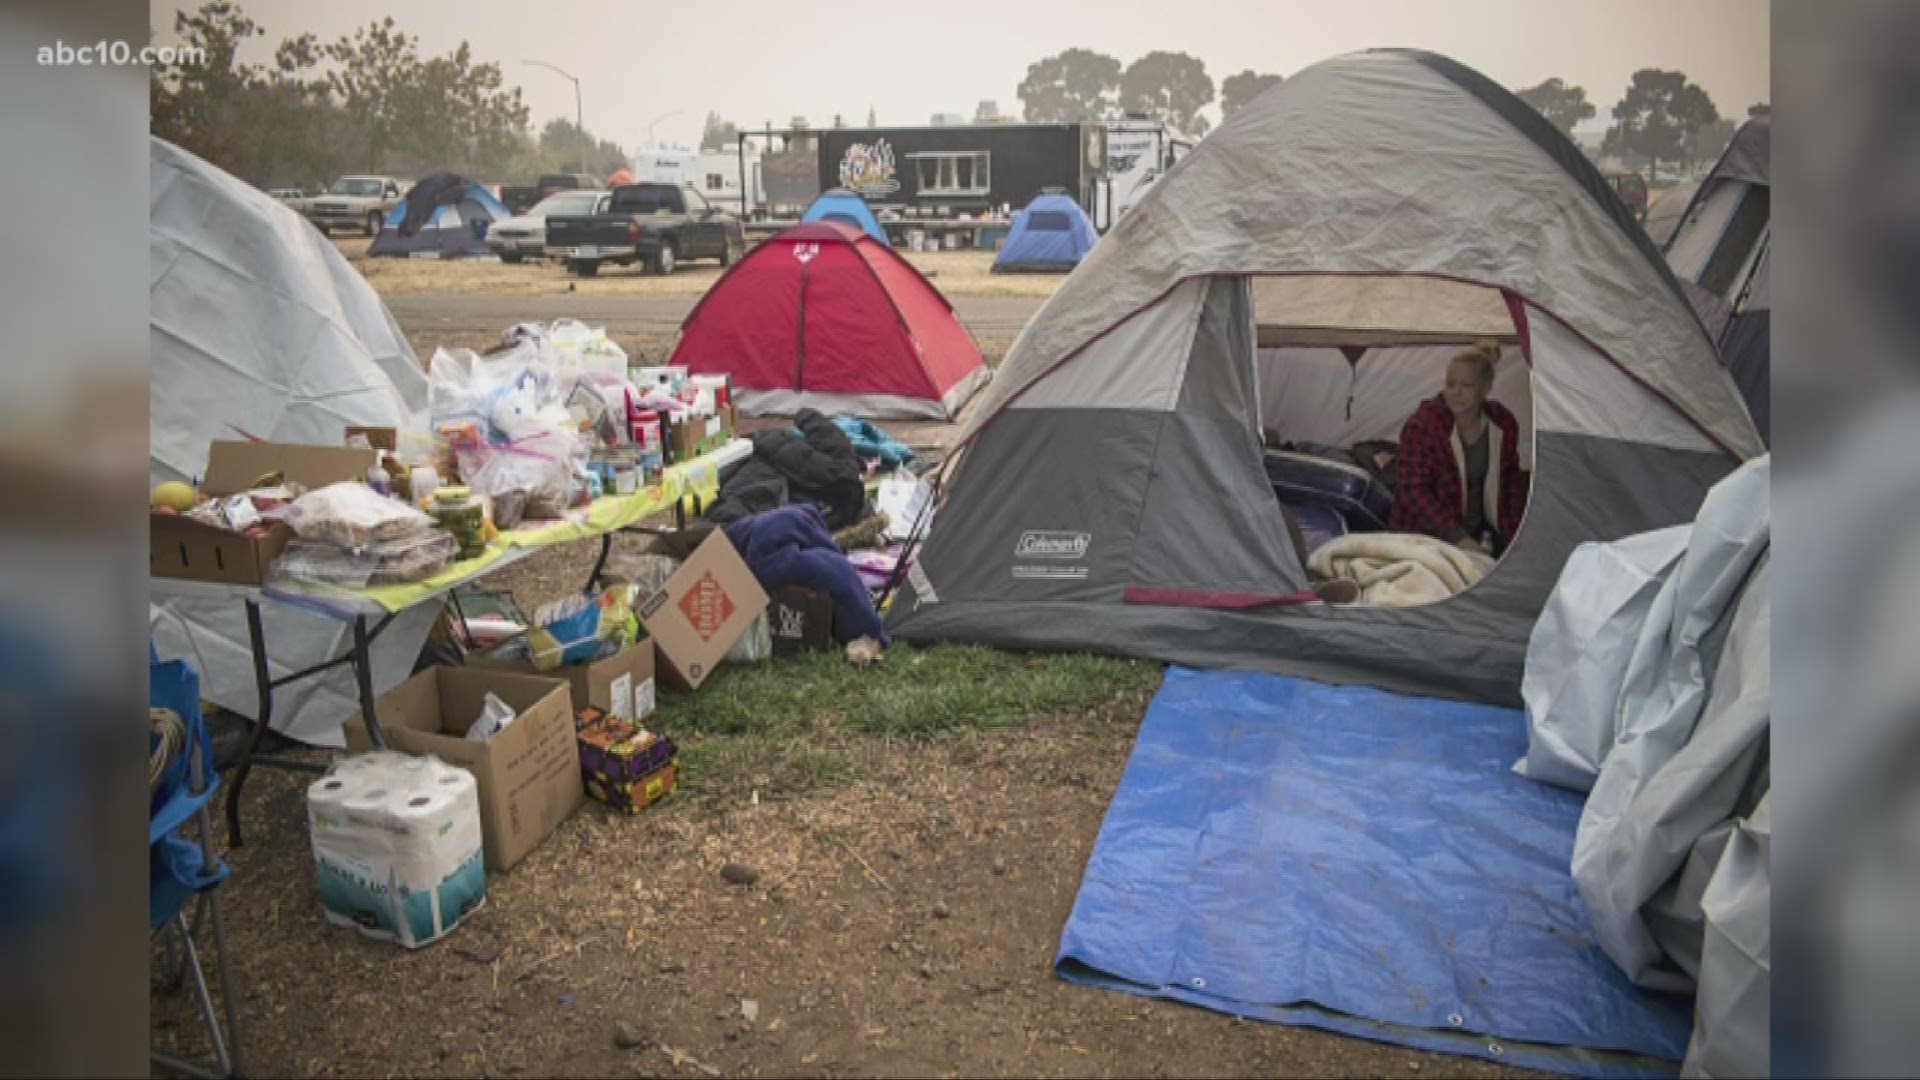 Hundreds of fire refugees are living in tents and makeshift shelters at Walmart parking lot and field next to the store in Chico.